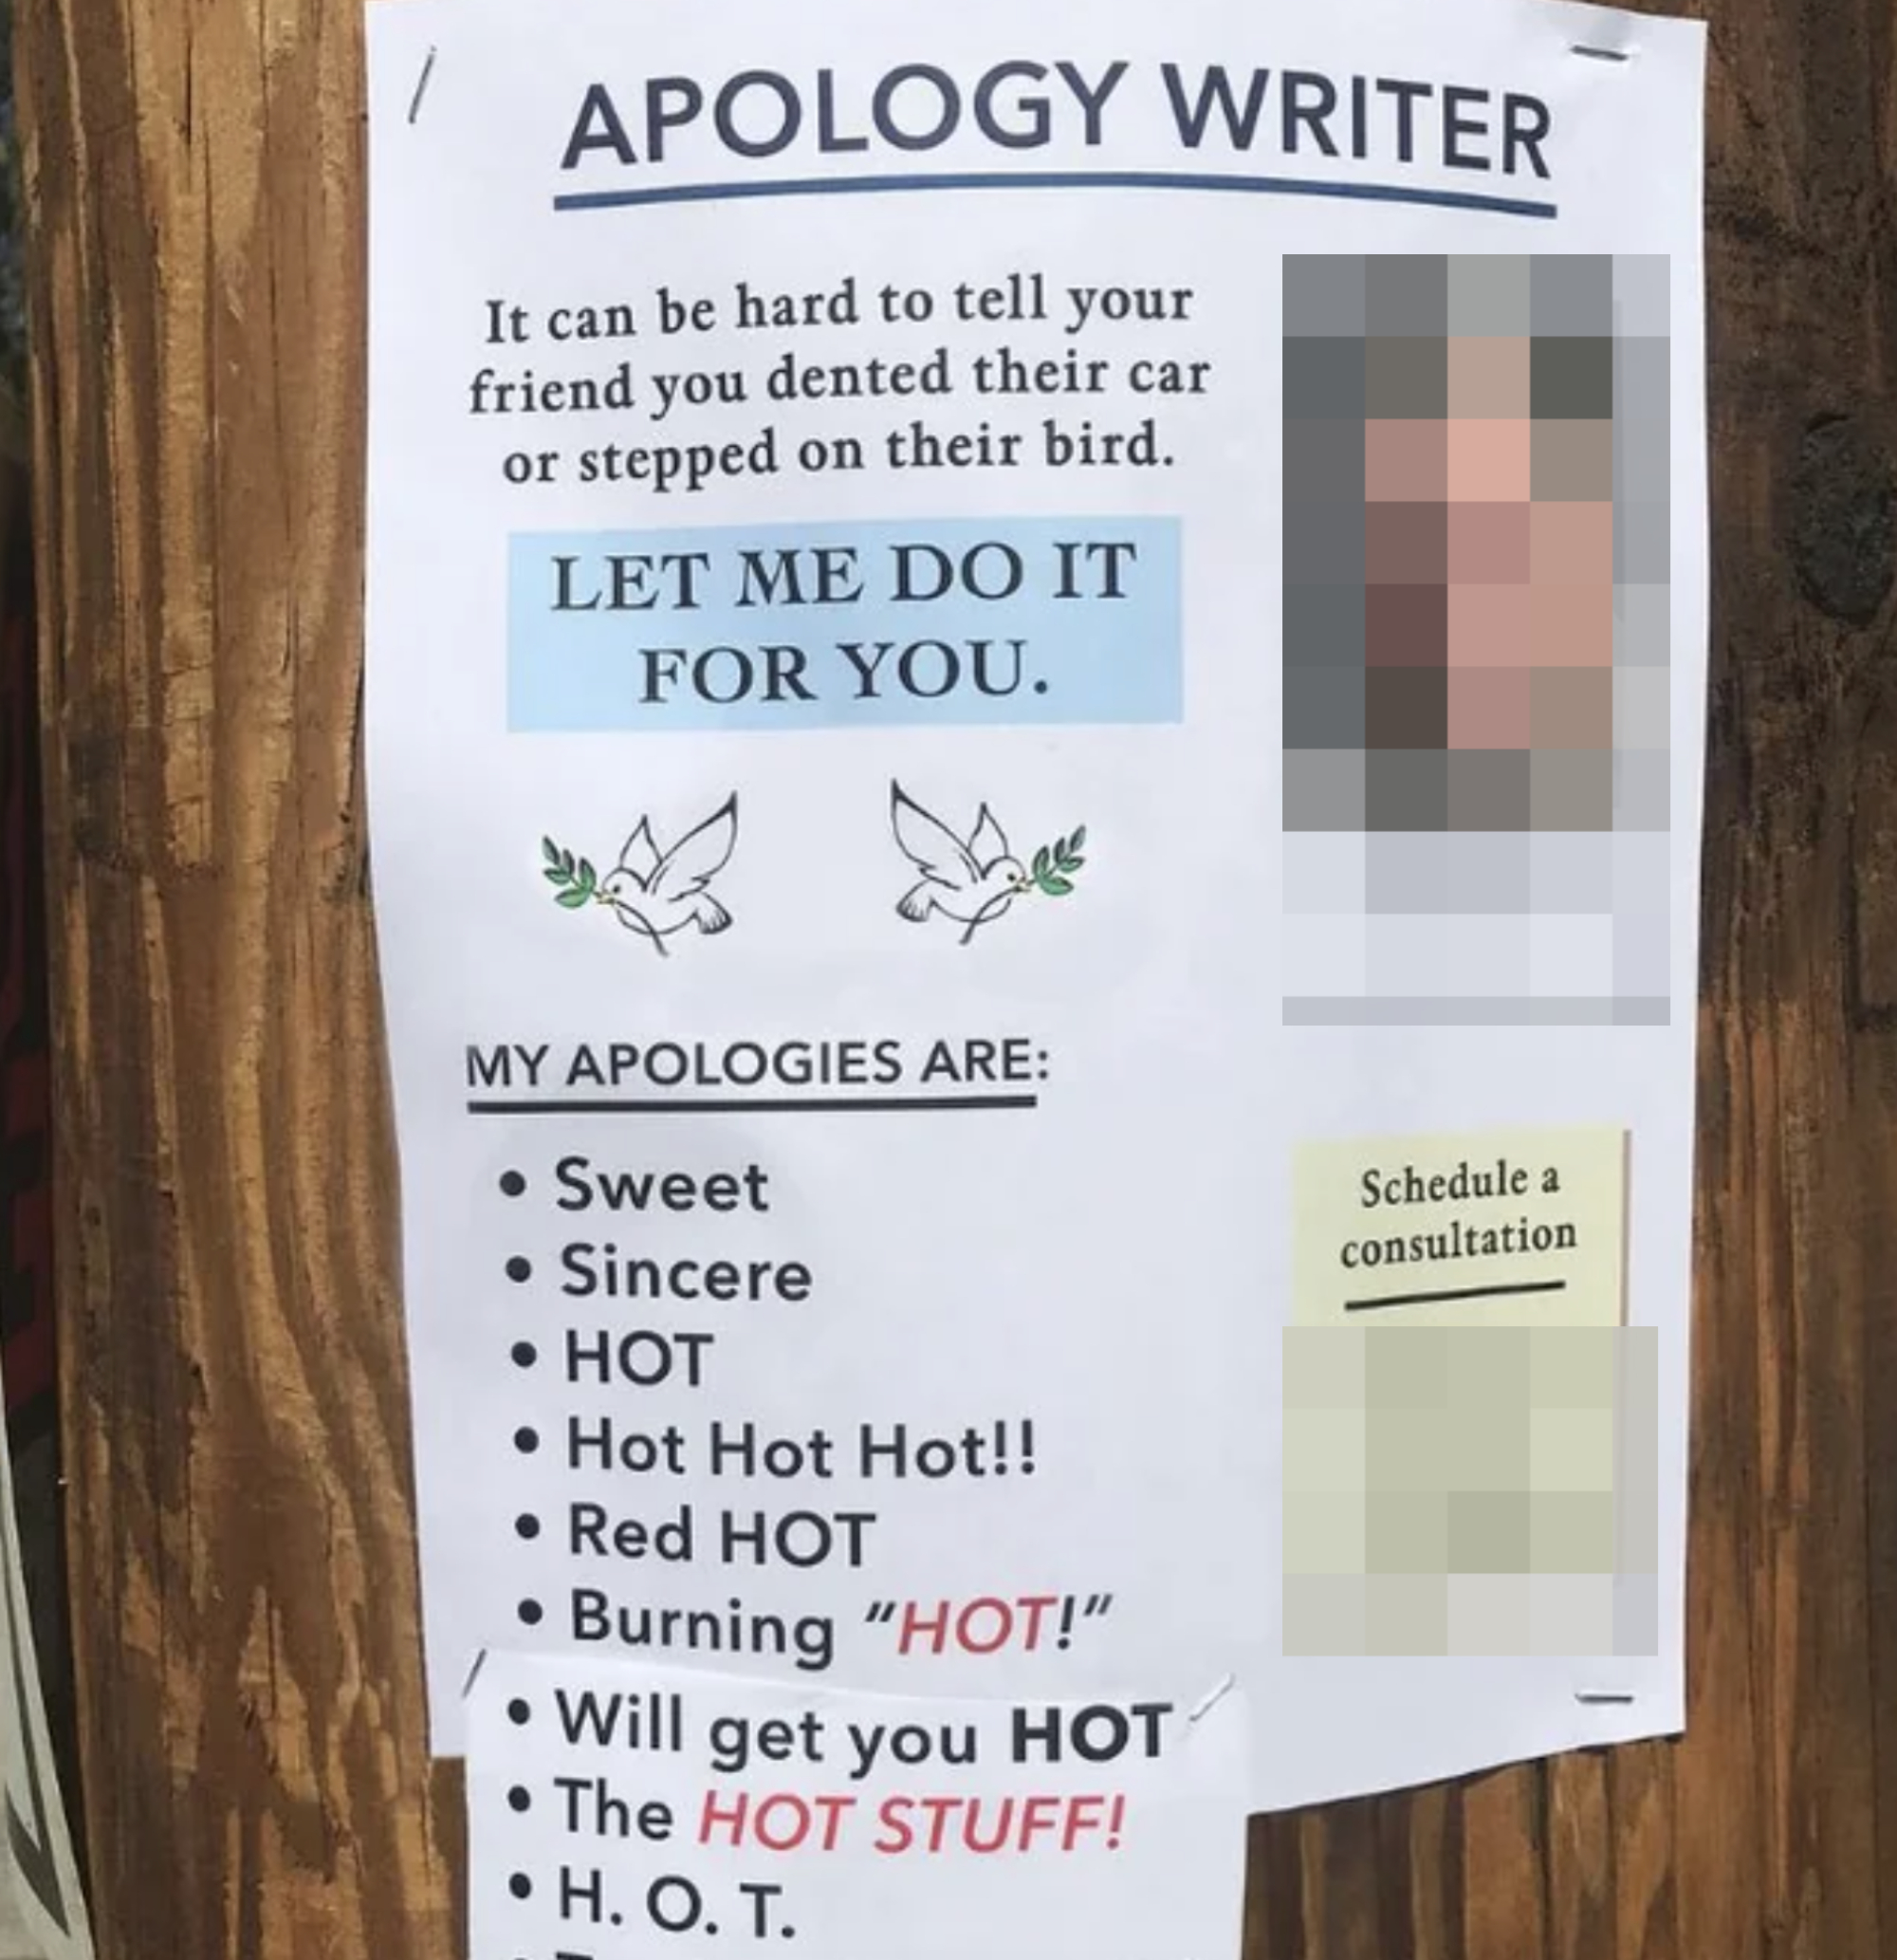 flyer for an apology writer offering their services promising their apologies are hot hot hot